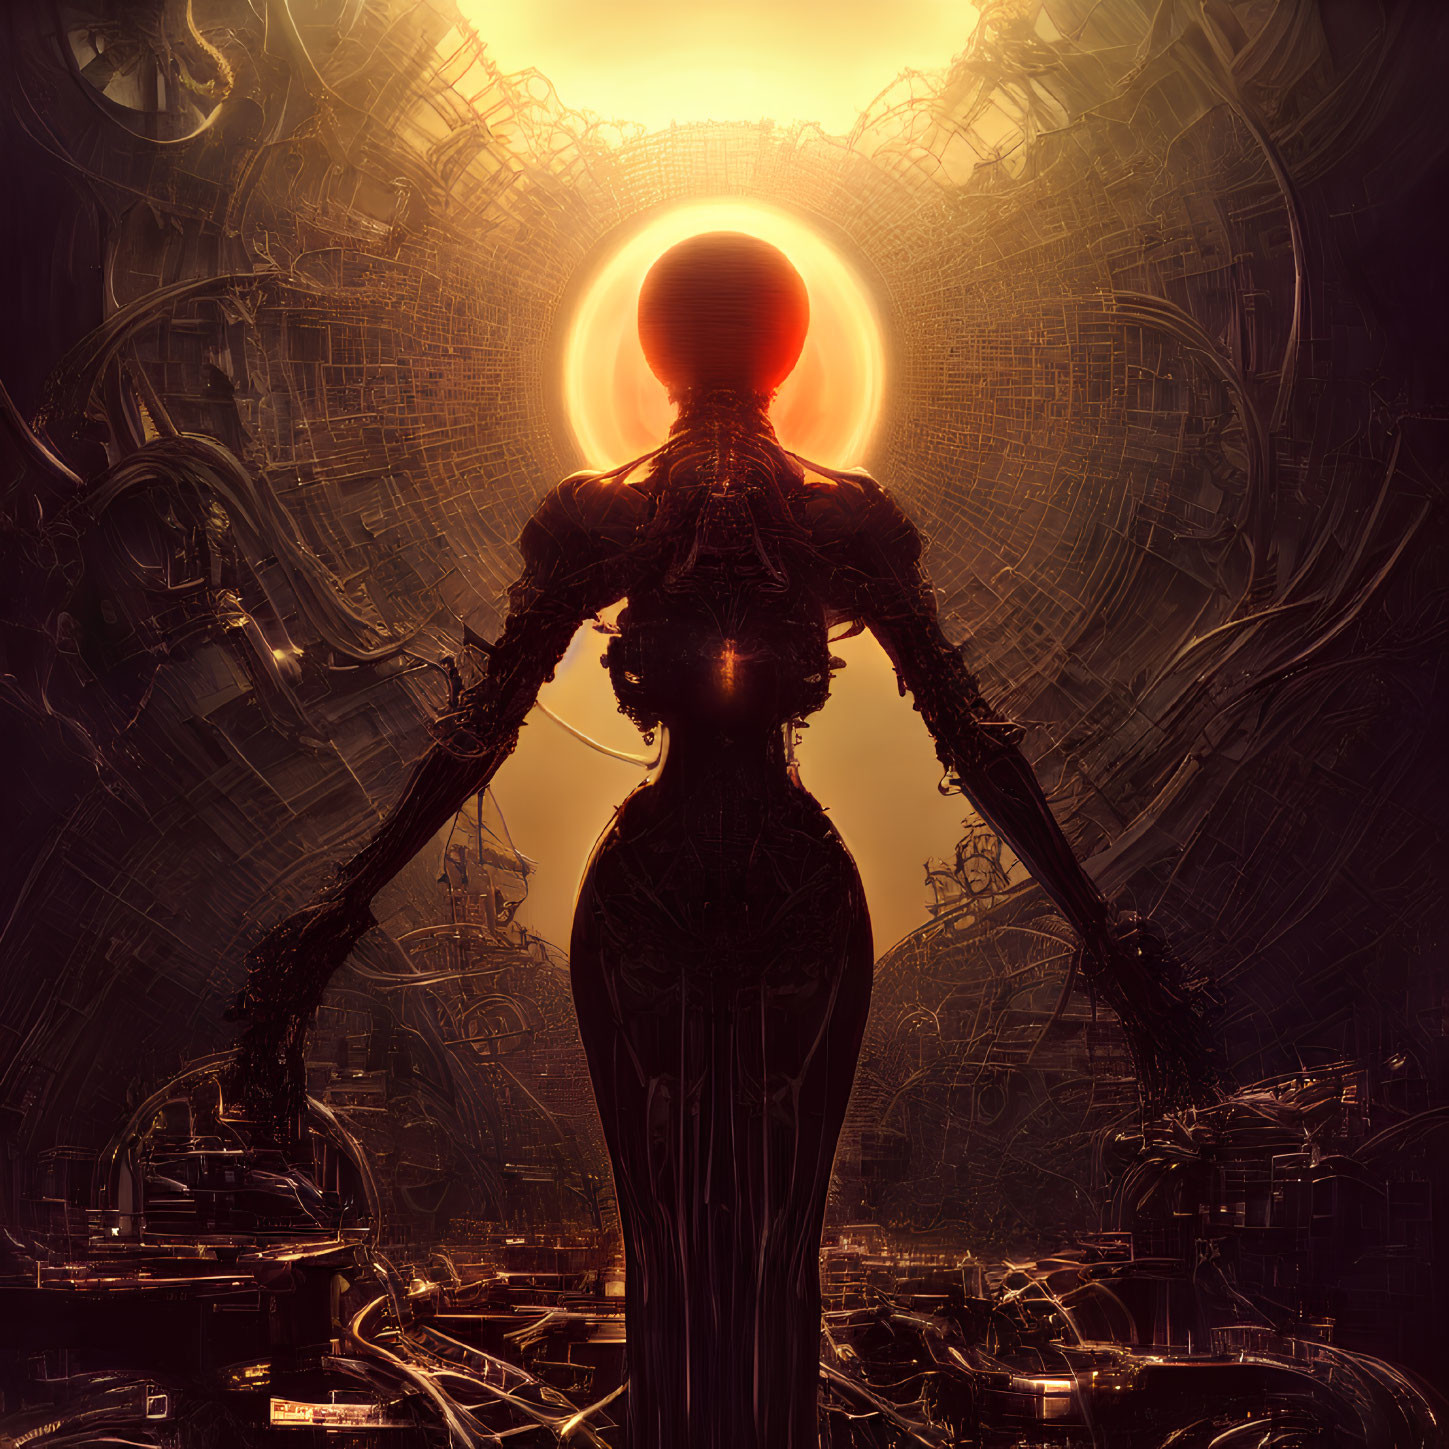 Futuristic cybernetic figure in cityscape with apocalyptic vibe